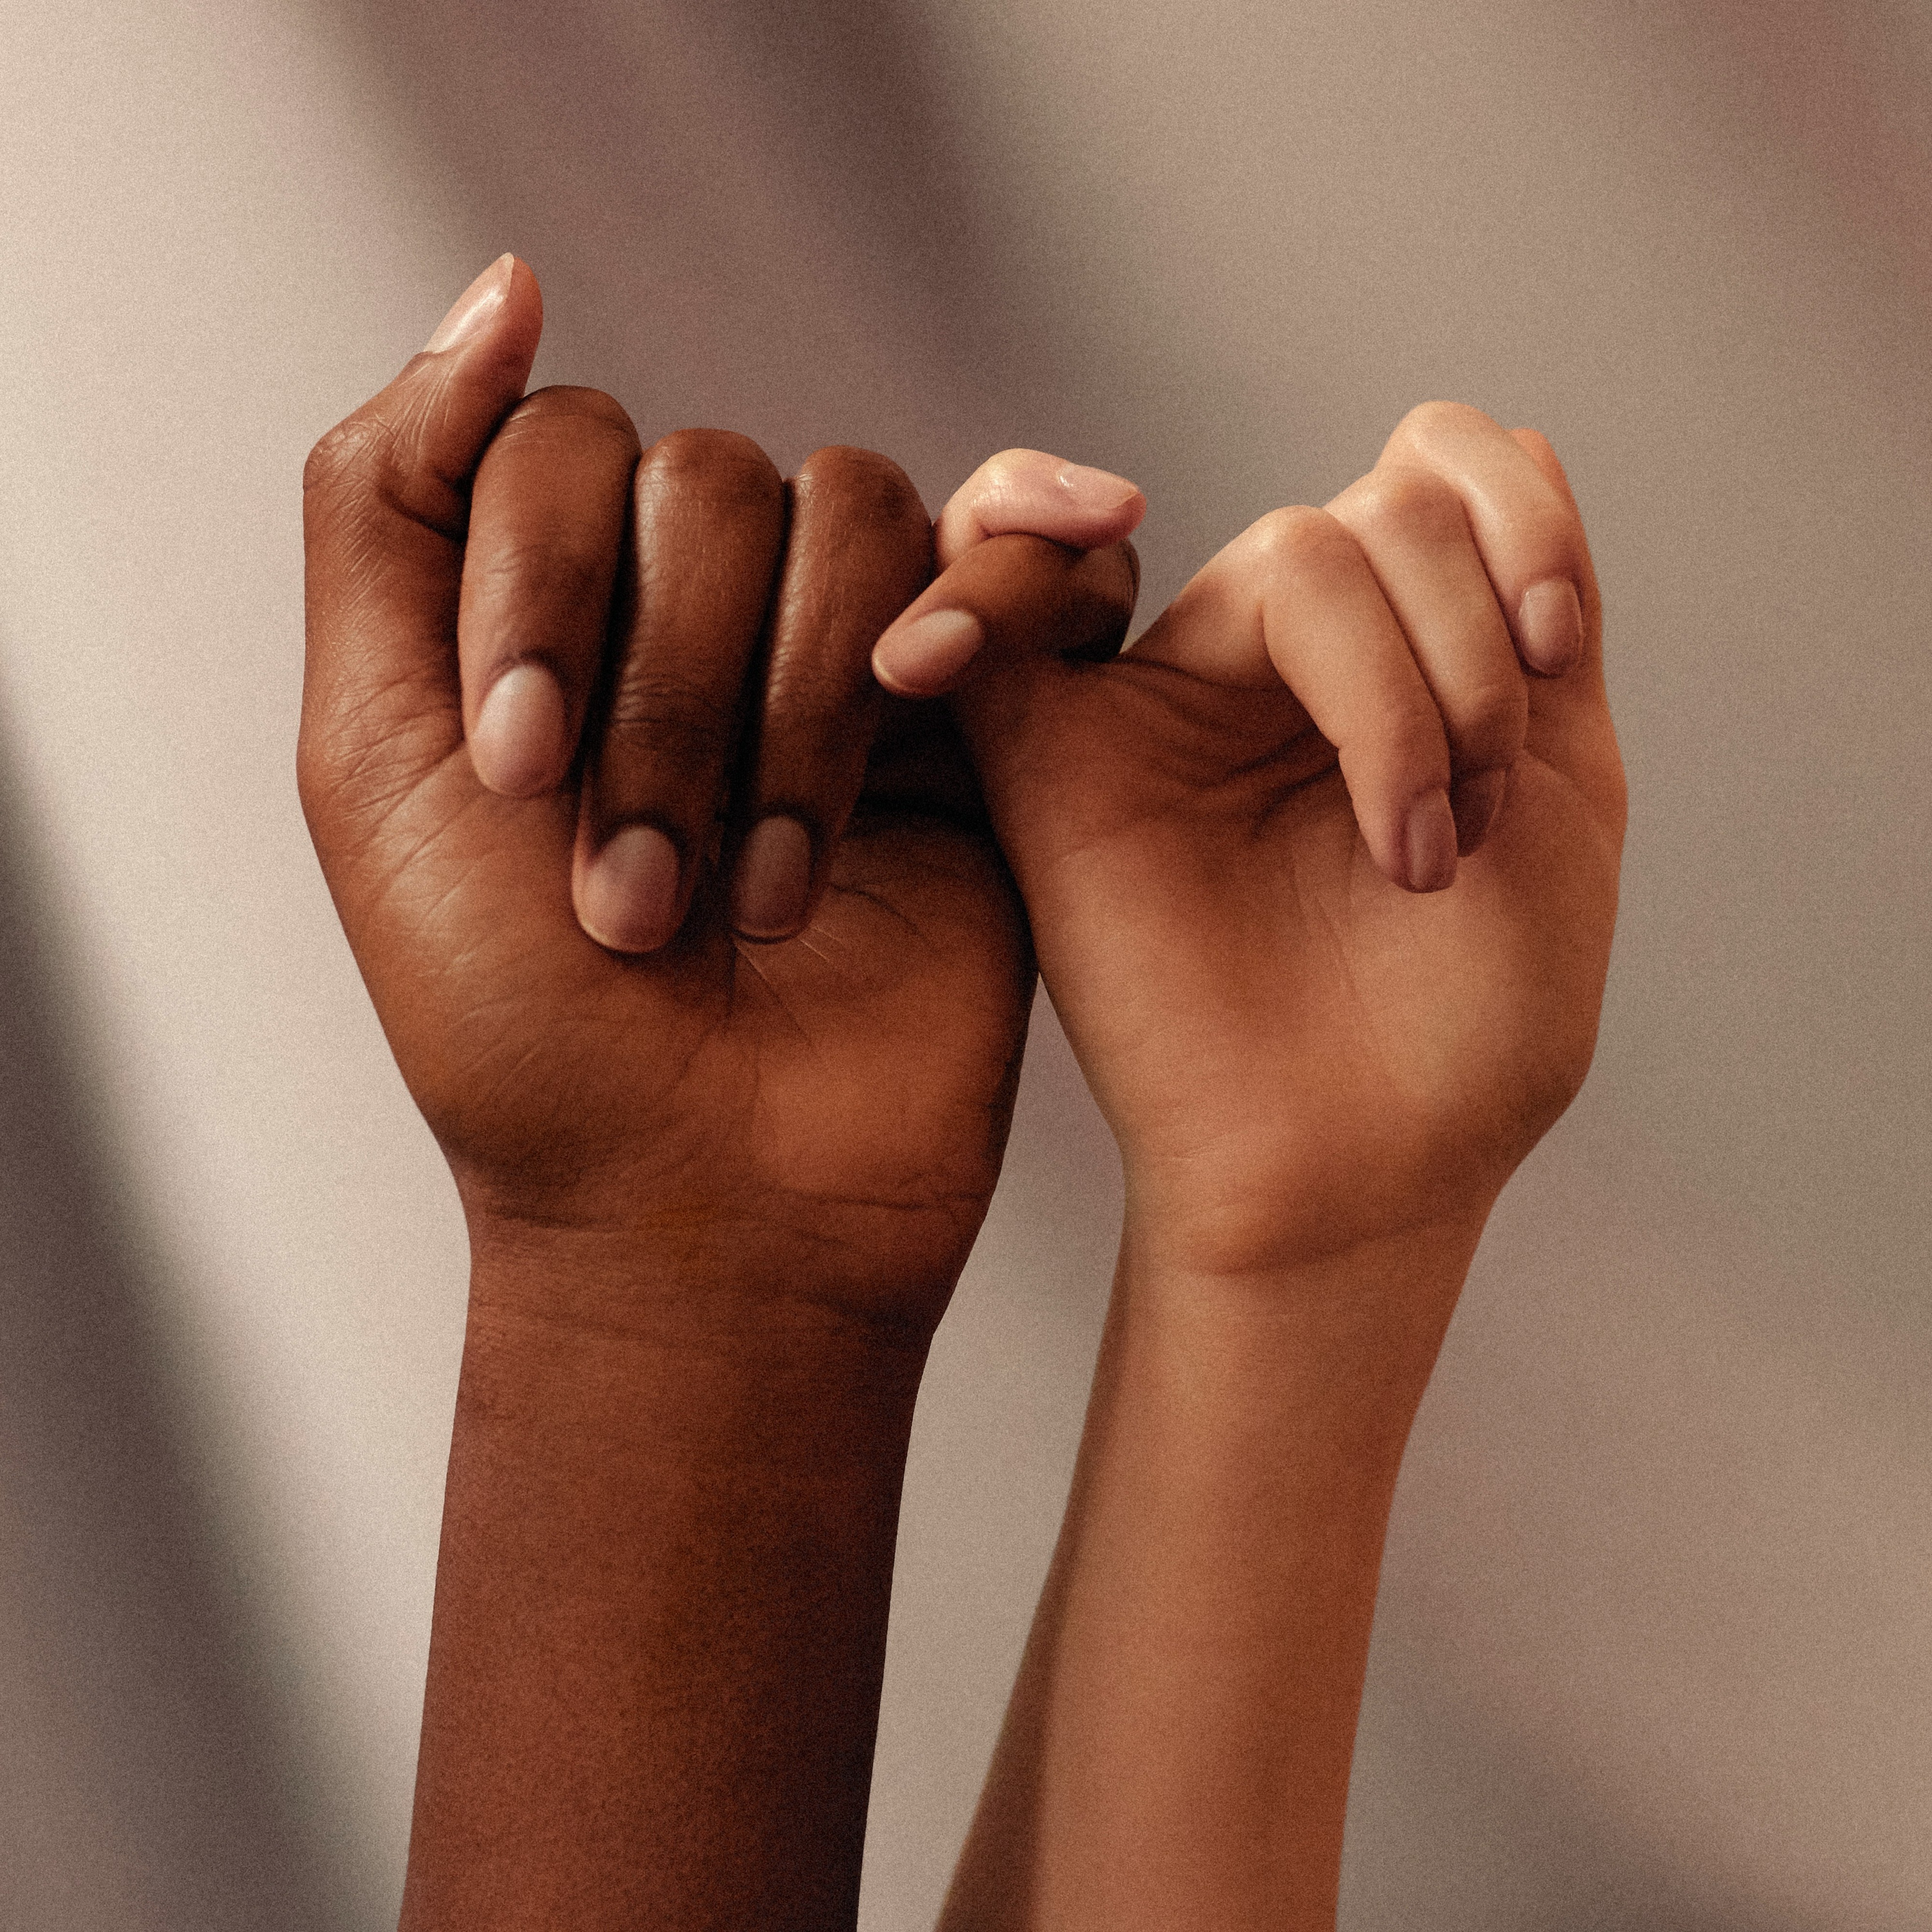 Two people's hands interlocked showing human connection